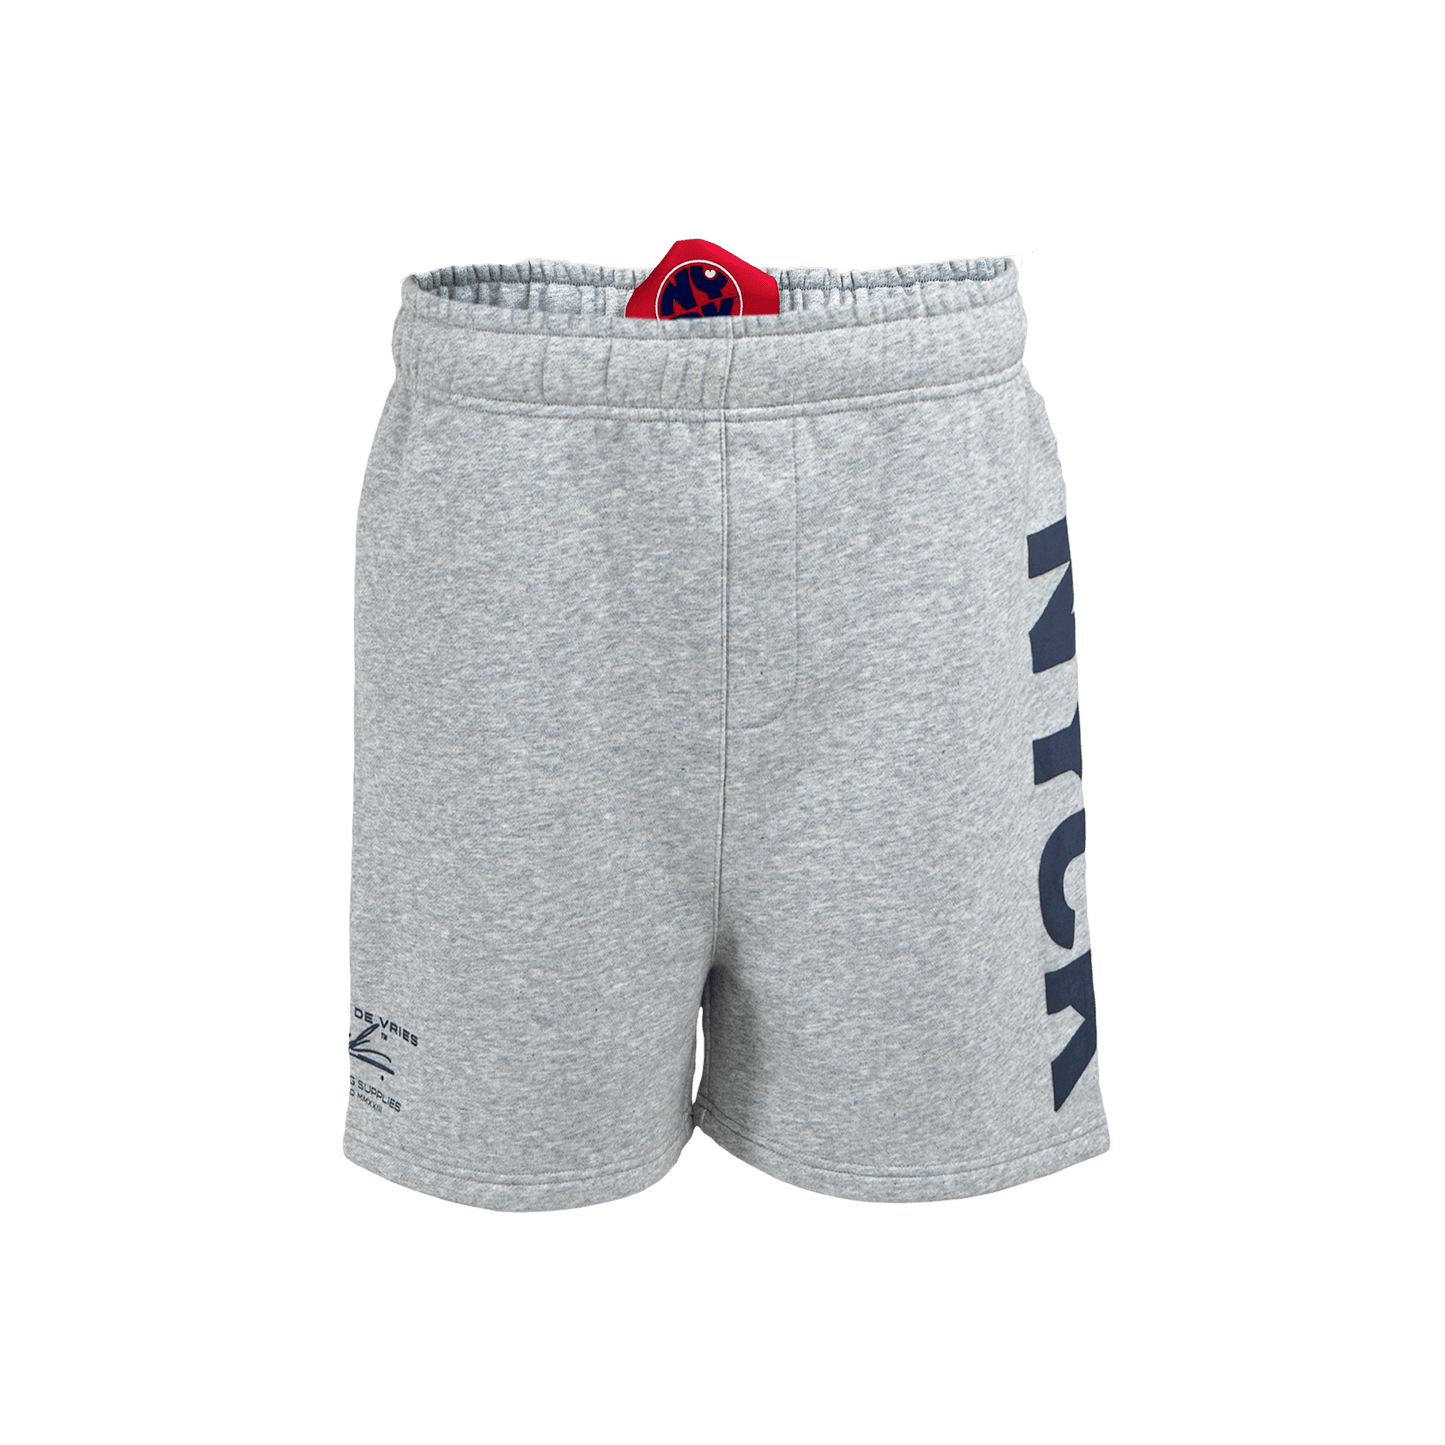 The official NYCK shorts